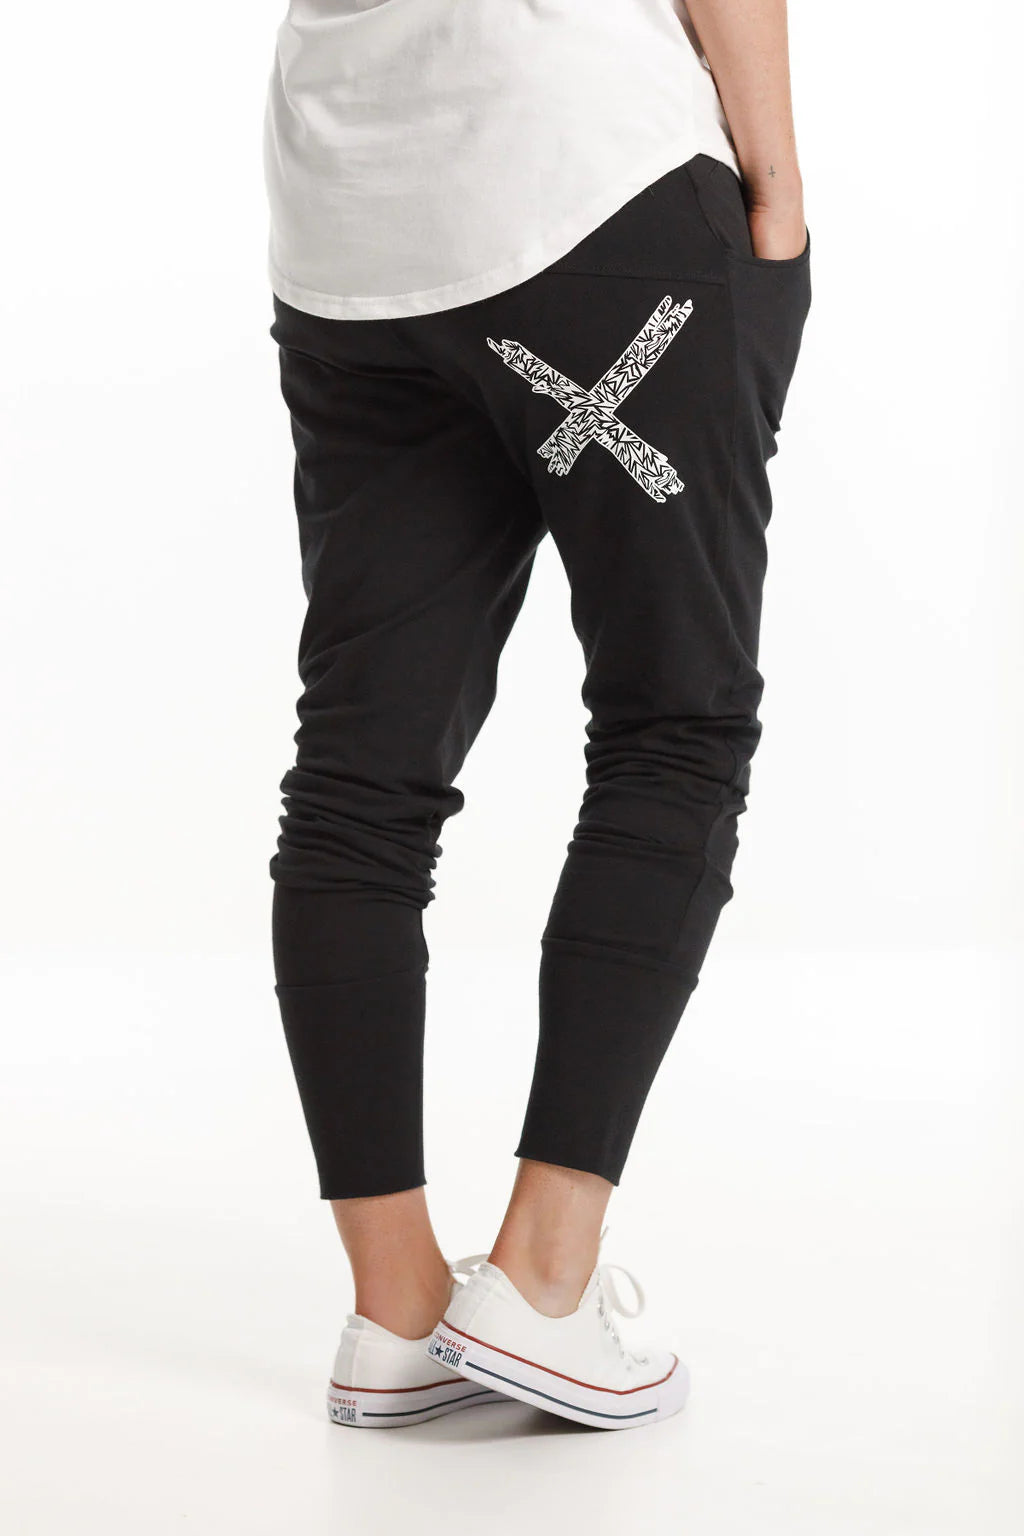 Homelee Apartment Pants - Black with Paper Plane X Print